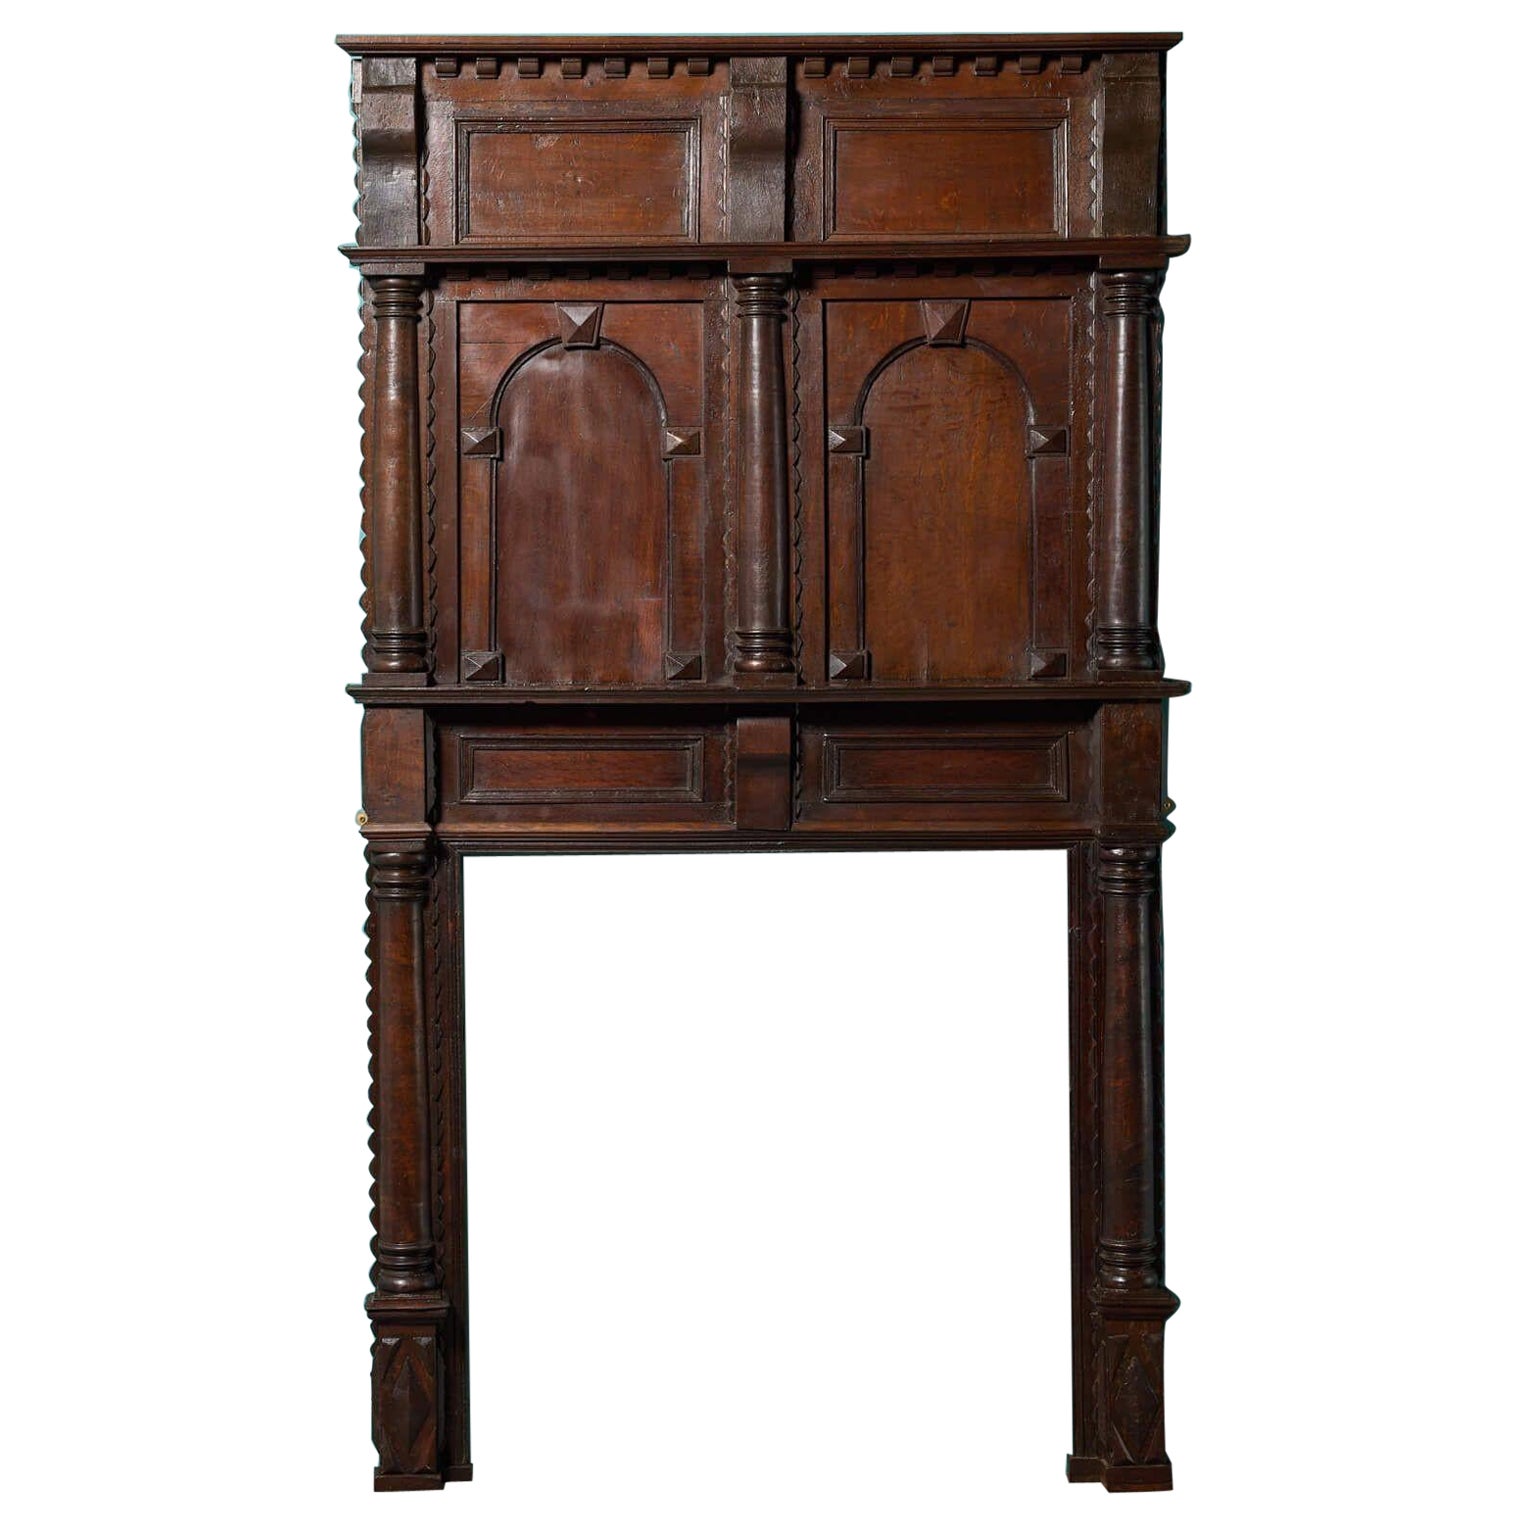 Early 17th Century Antique Oak Fire Surround with Overmantel